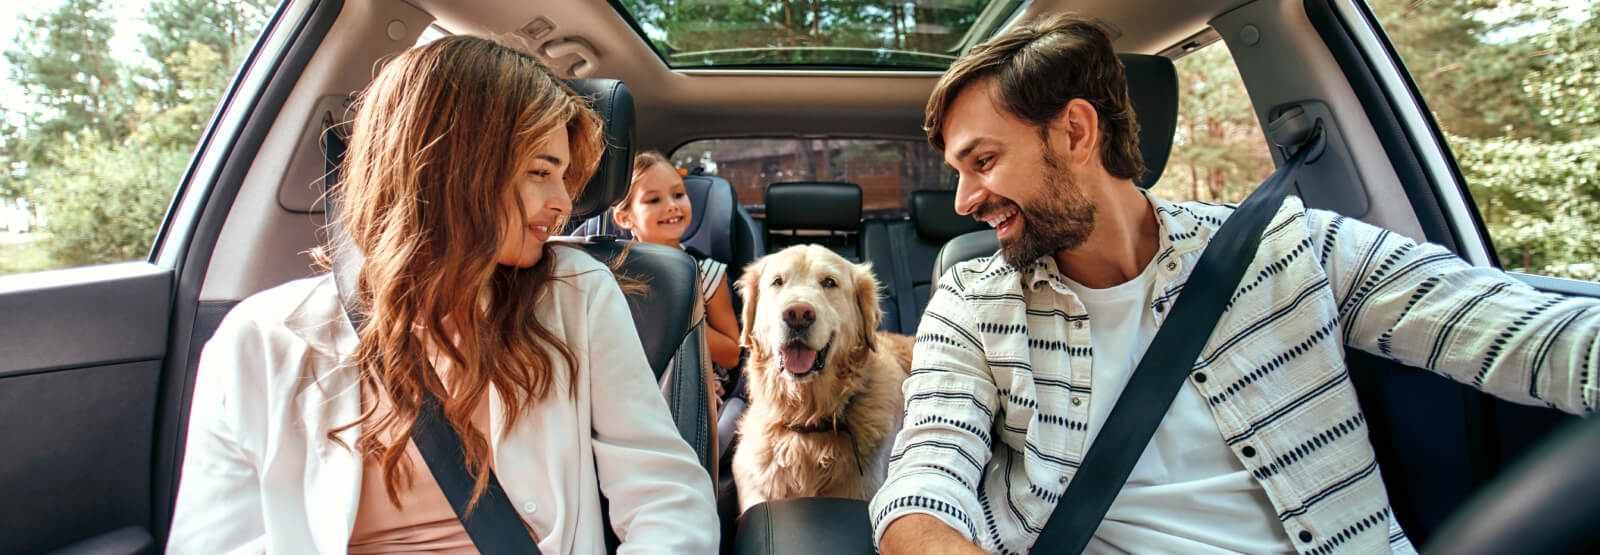 family of 3 with their dog in a vehicle